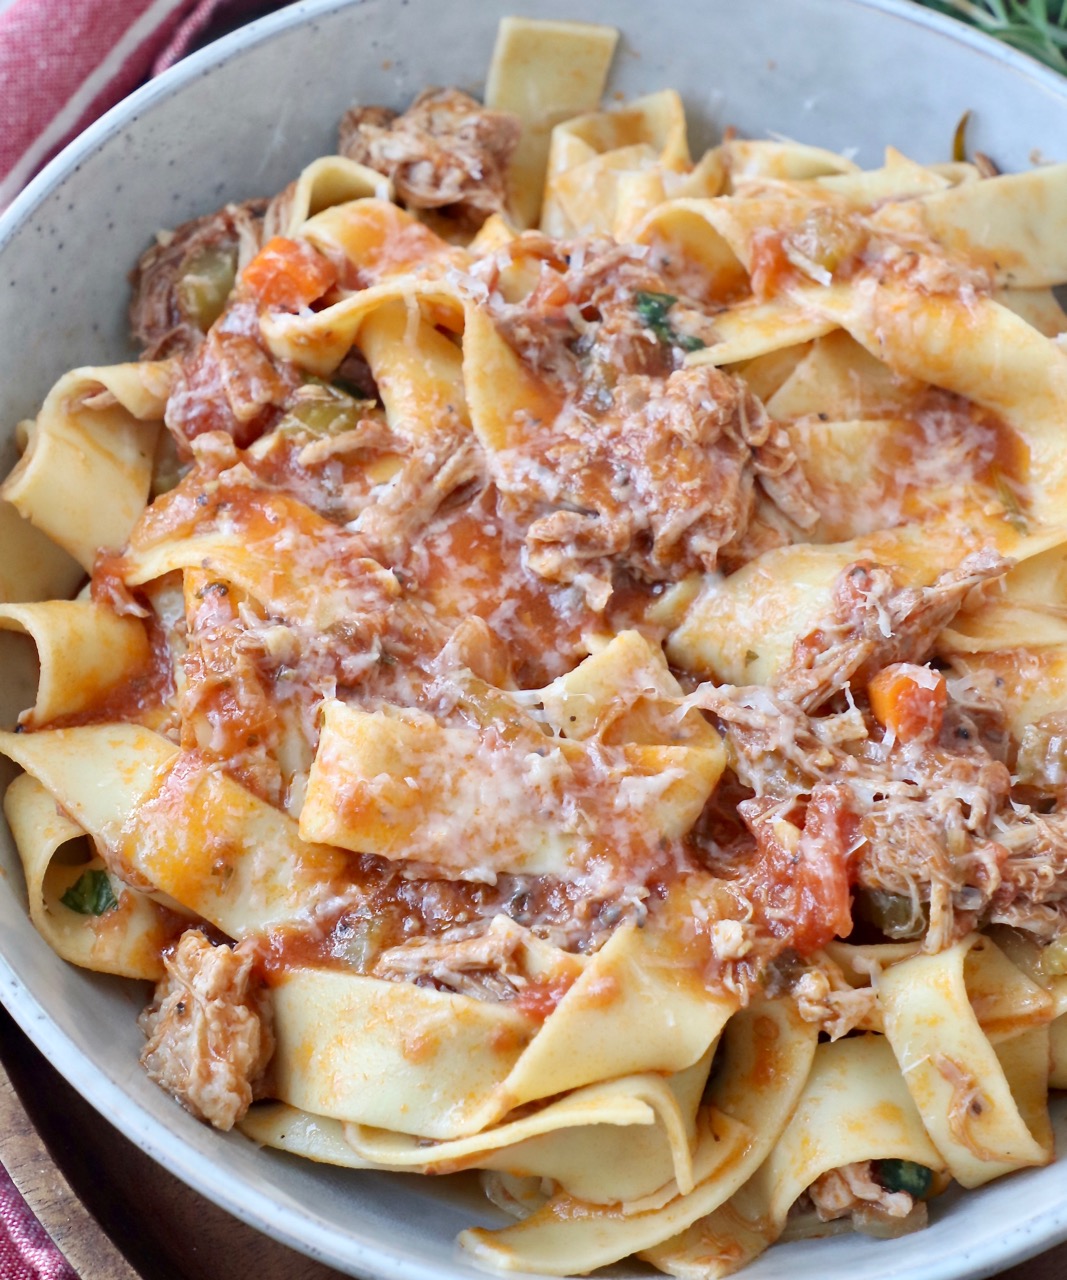 cooked pasta tossed with pork ragu sauce in a bowl